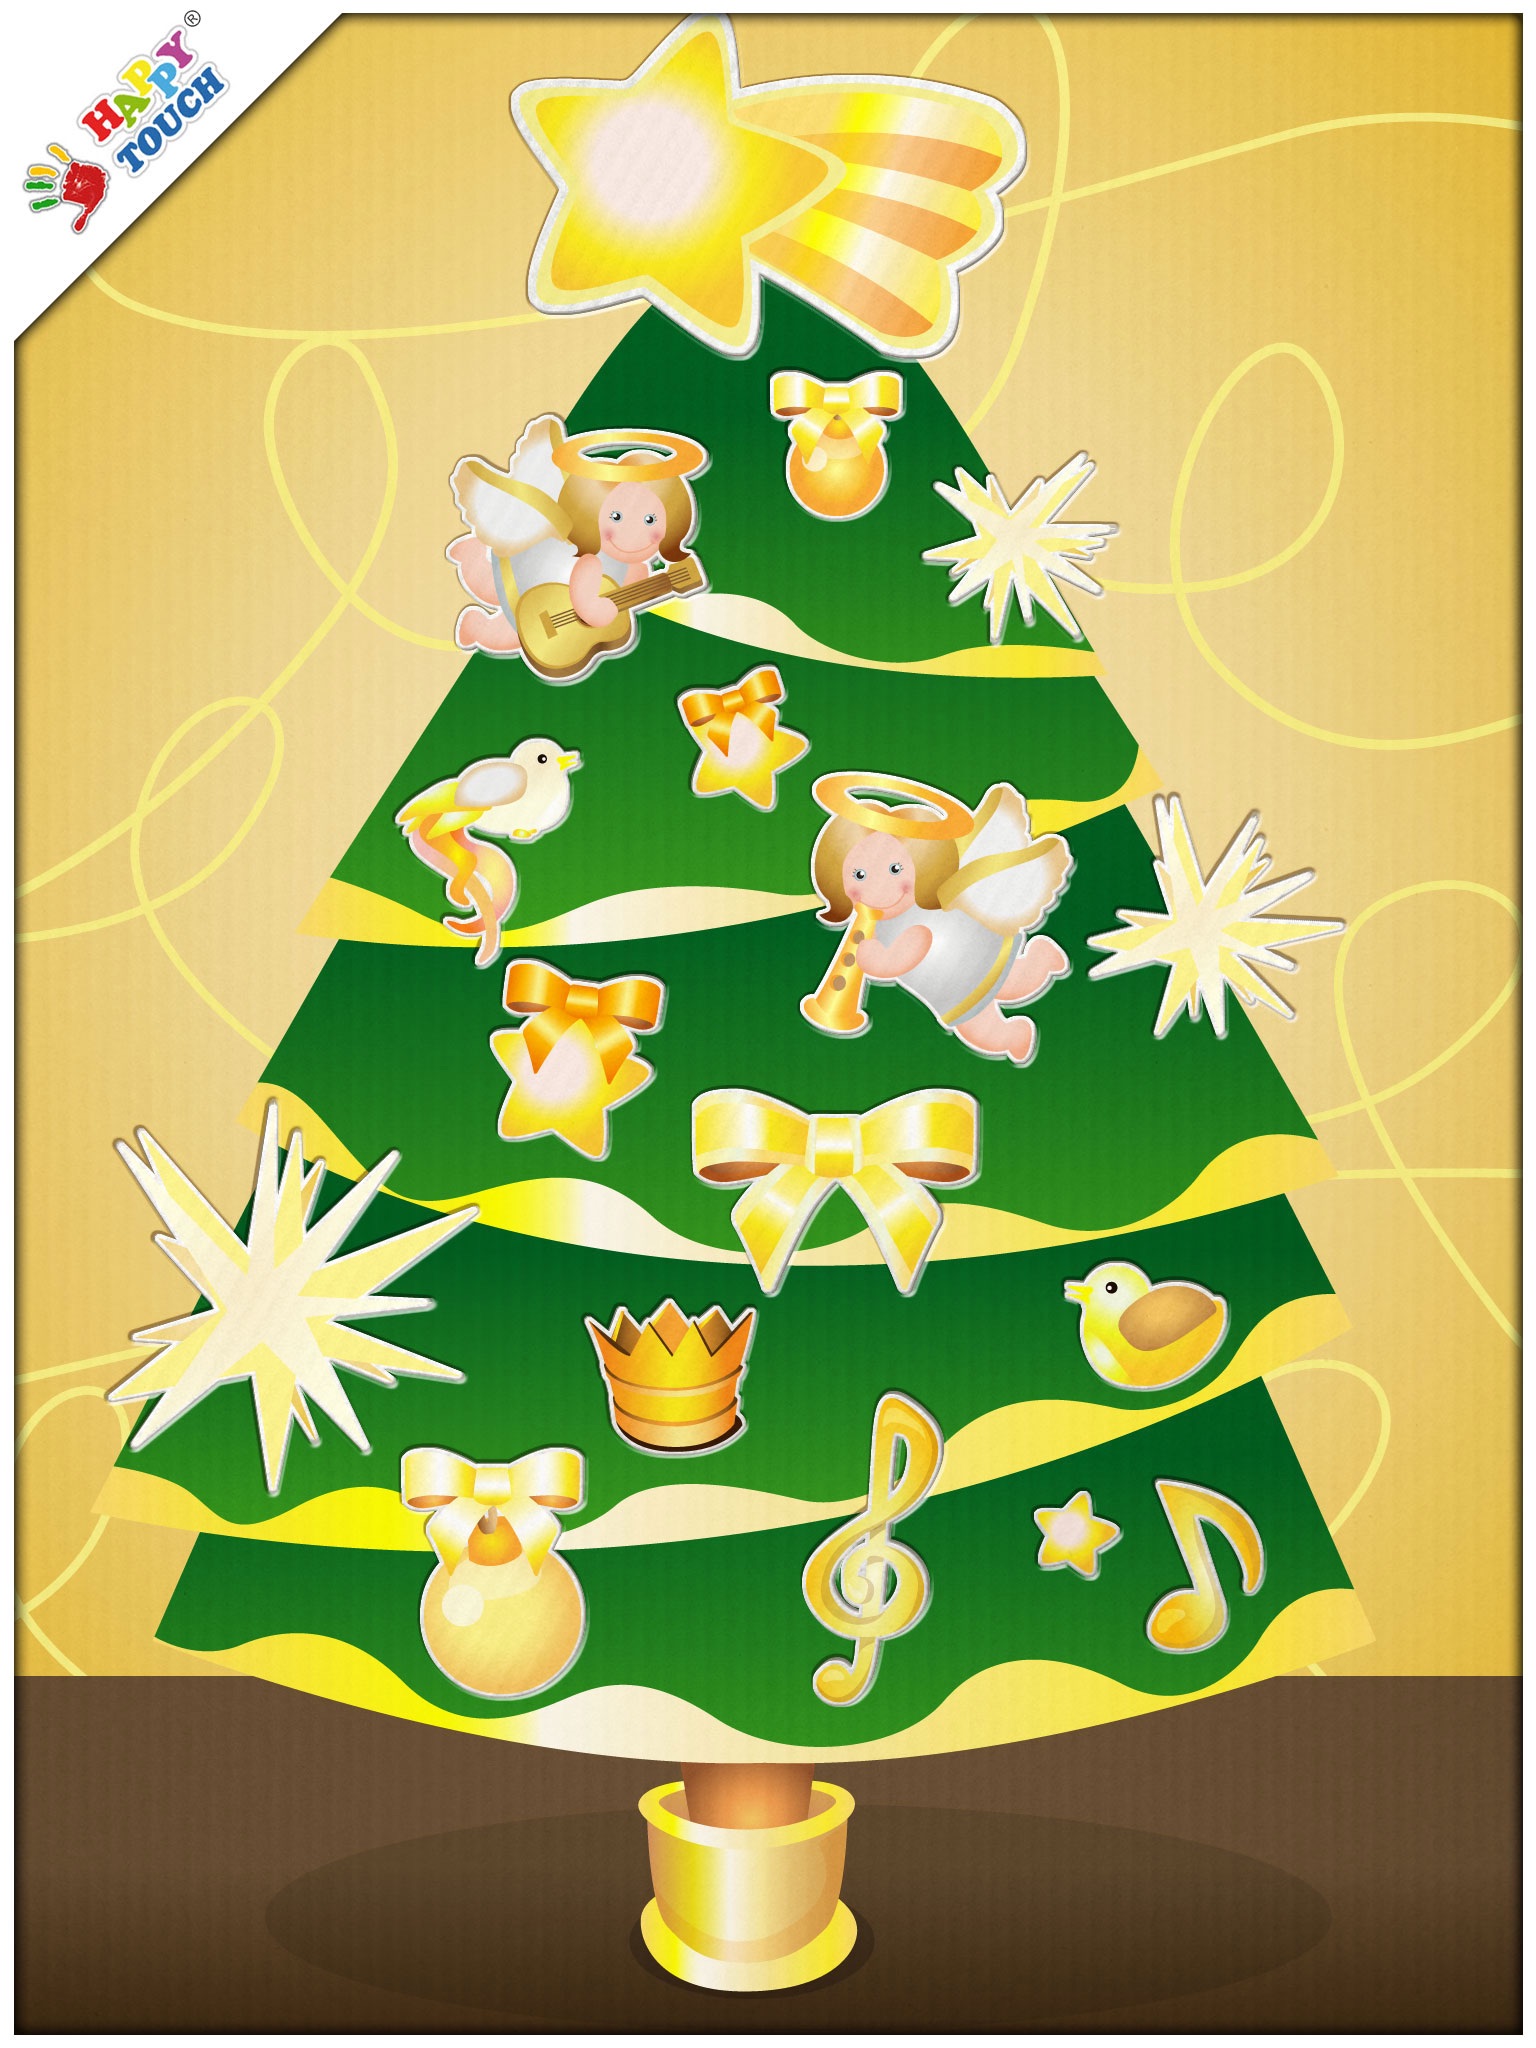 Christmas Tree Decorating for kids (by Happy Touch) screenshot 3